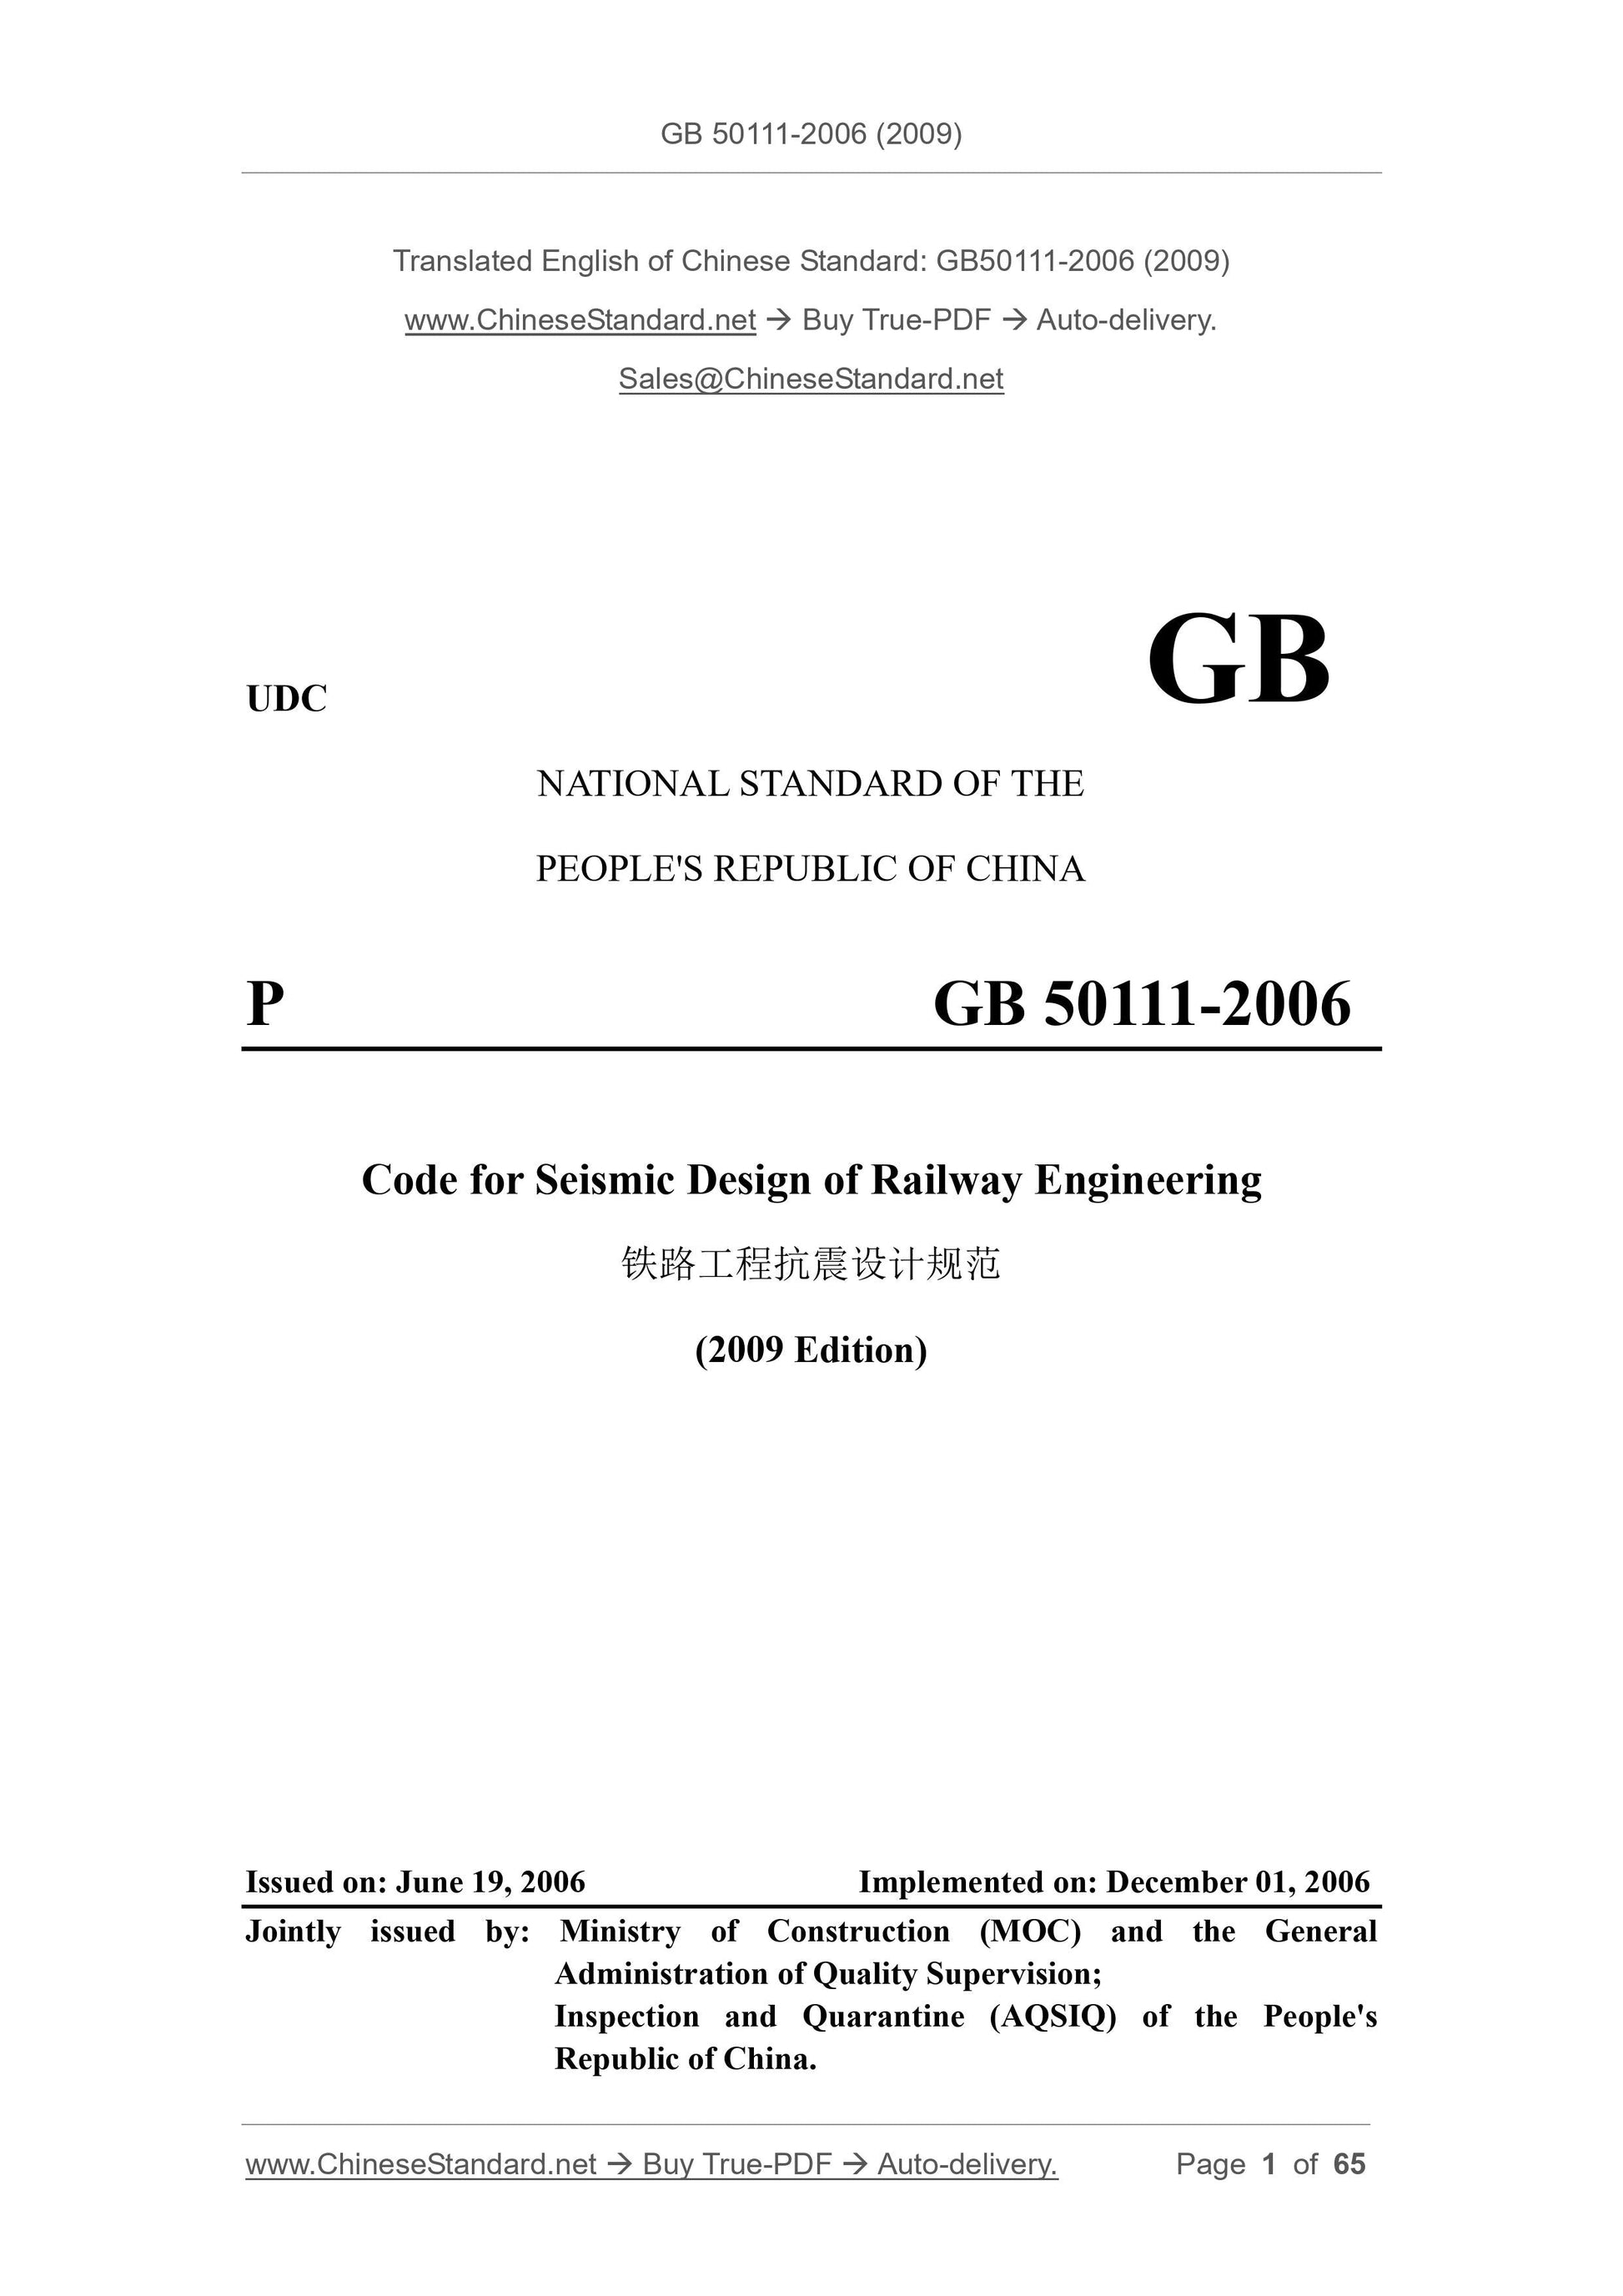 GB 50111-2009 Page 1